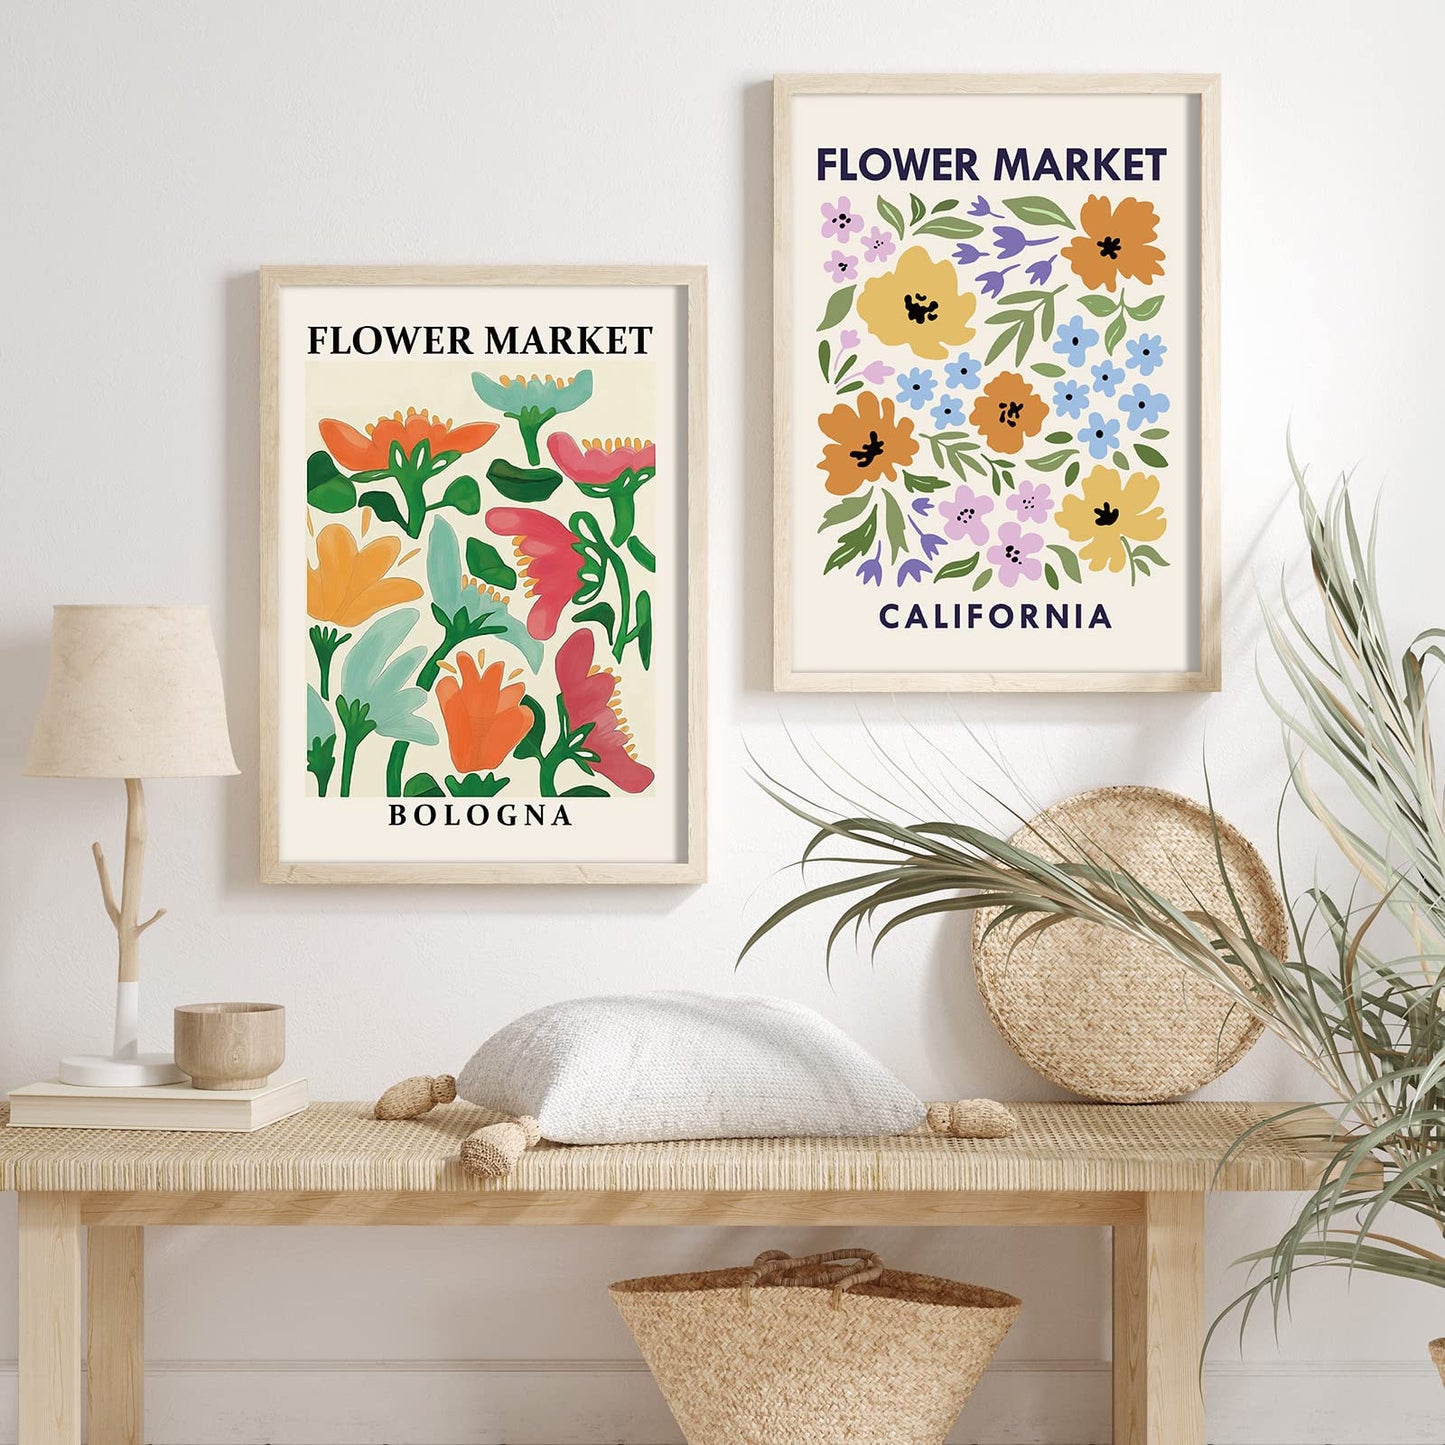 AnyDesign 9Pcs Flower Market Wall Art Prints Aesthetic Floral Drawing Art Poster Colorful Floral Posters Botanical Room Decor for Gallery Room Living Room Bathroom Decor Photo Props(NO FRAME 8x10)